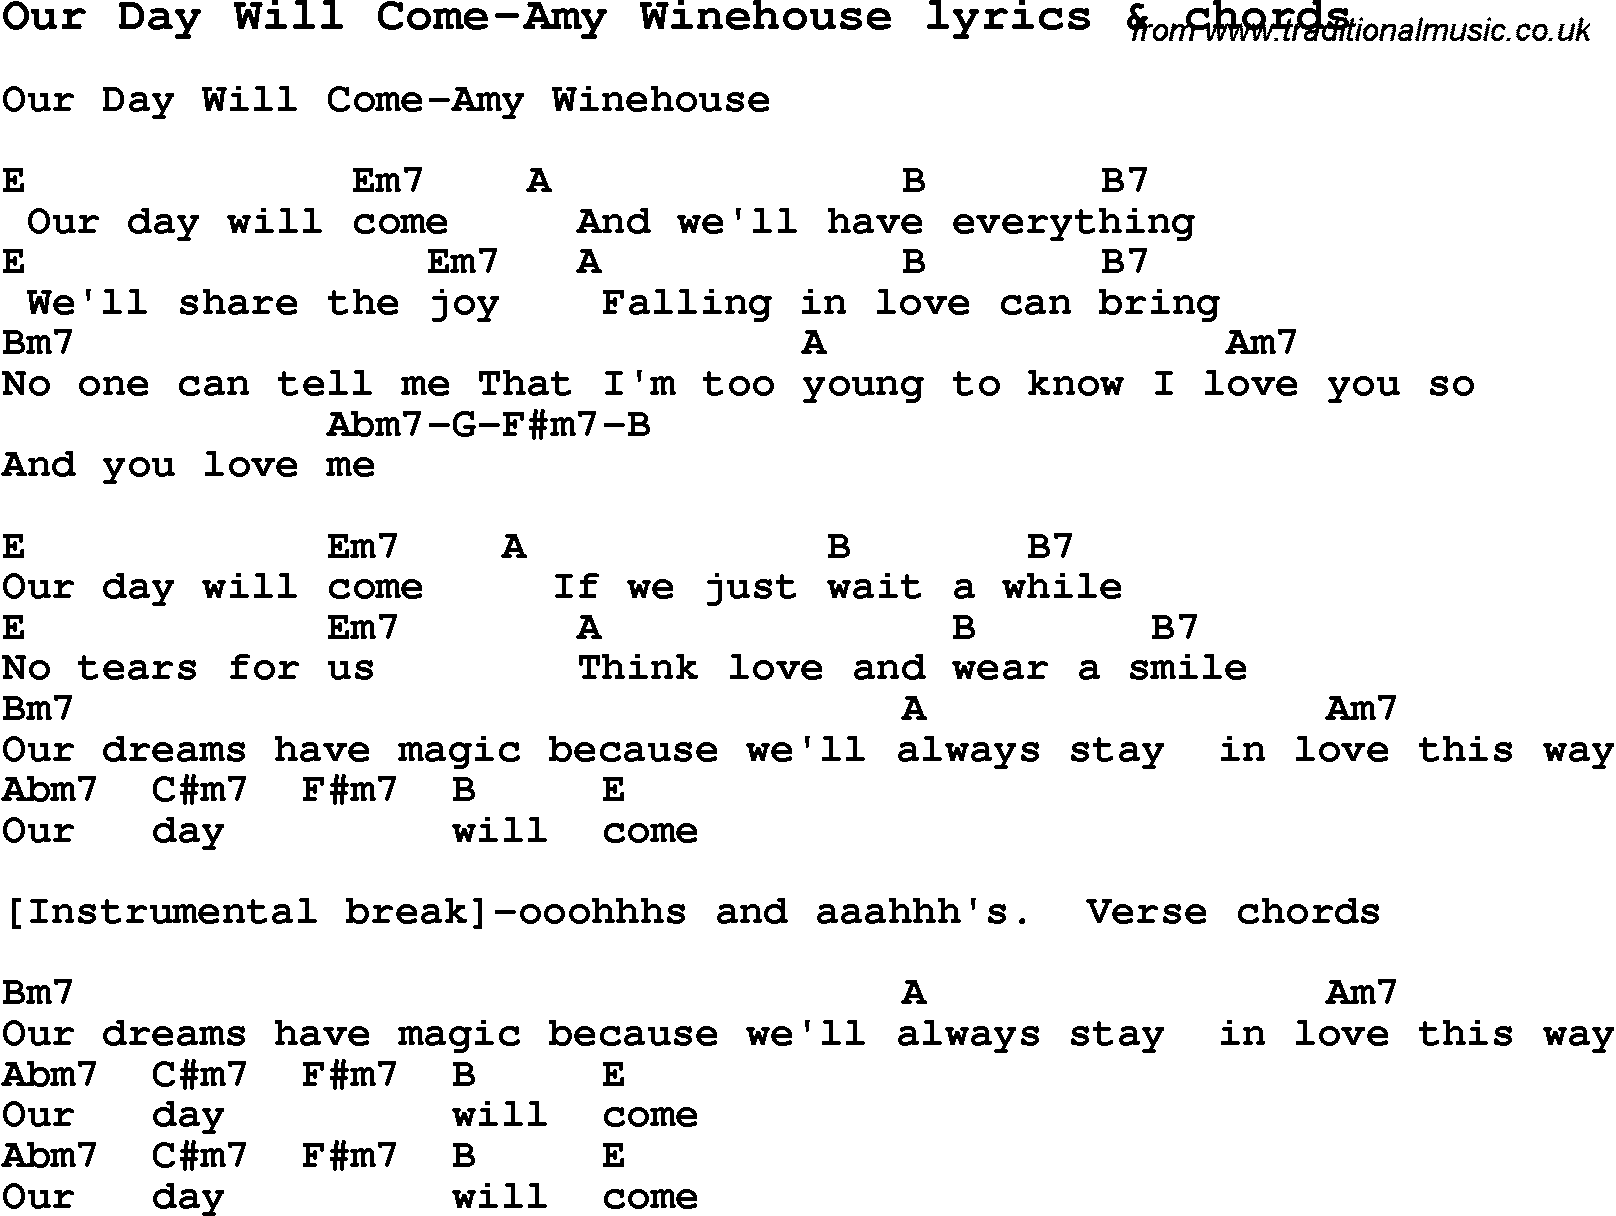 Love Song Lyrics for: Our Day Will Come-Amy Winehouse with chords for Ukulele, Guitar Banjo etc.